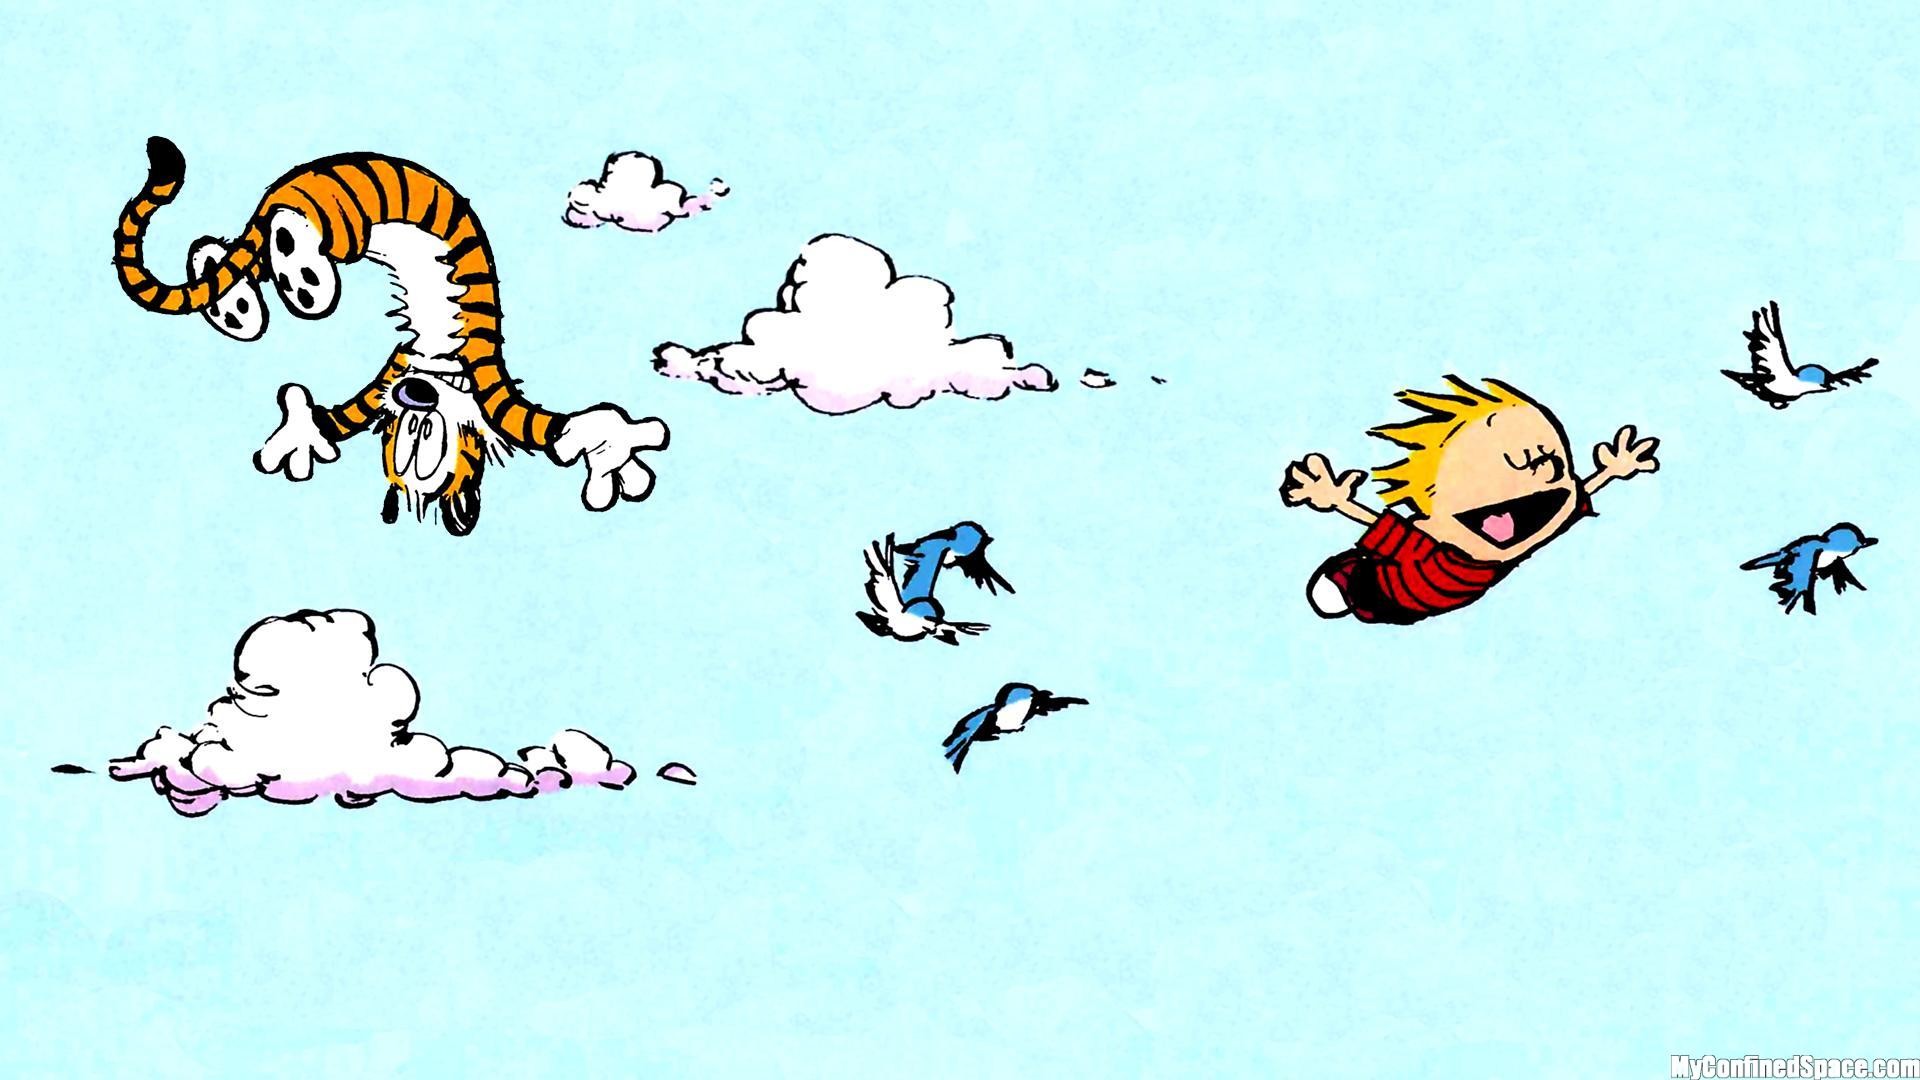 Quick edit on an old Calvin and Hobbes favorite 19201080 Calvin And Hobbes Wallpapers